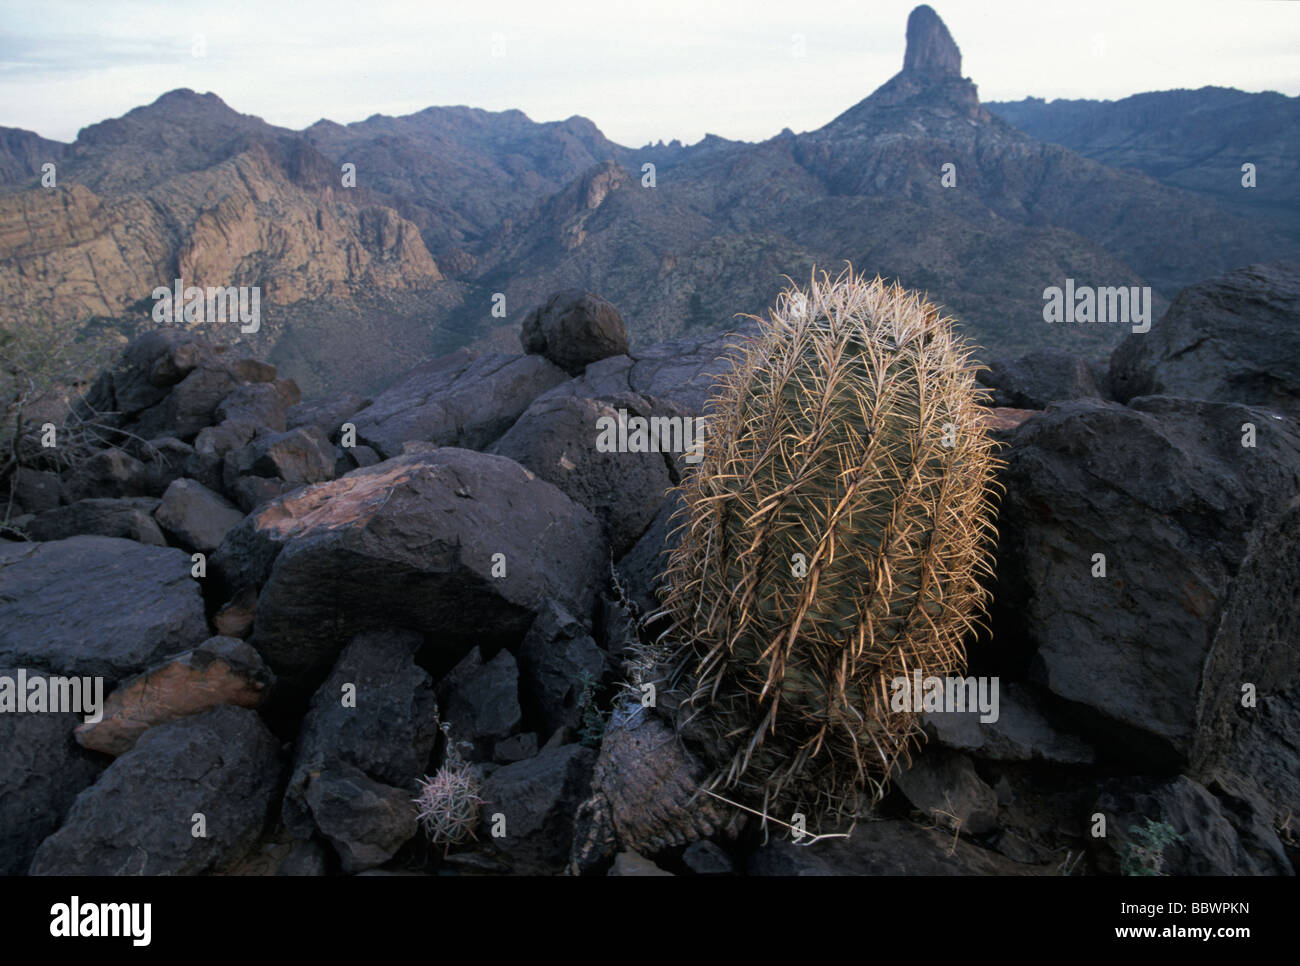 Cactus with the Weavers Needle in the background in the Superstition Mountains of central Arizona Stock Photo